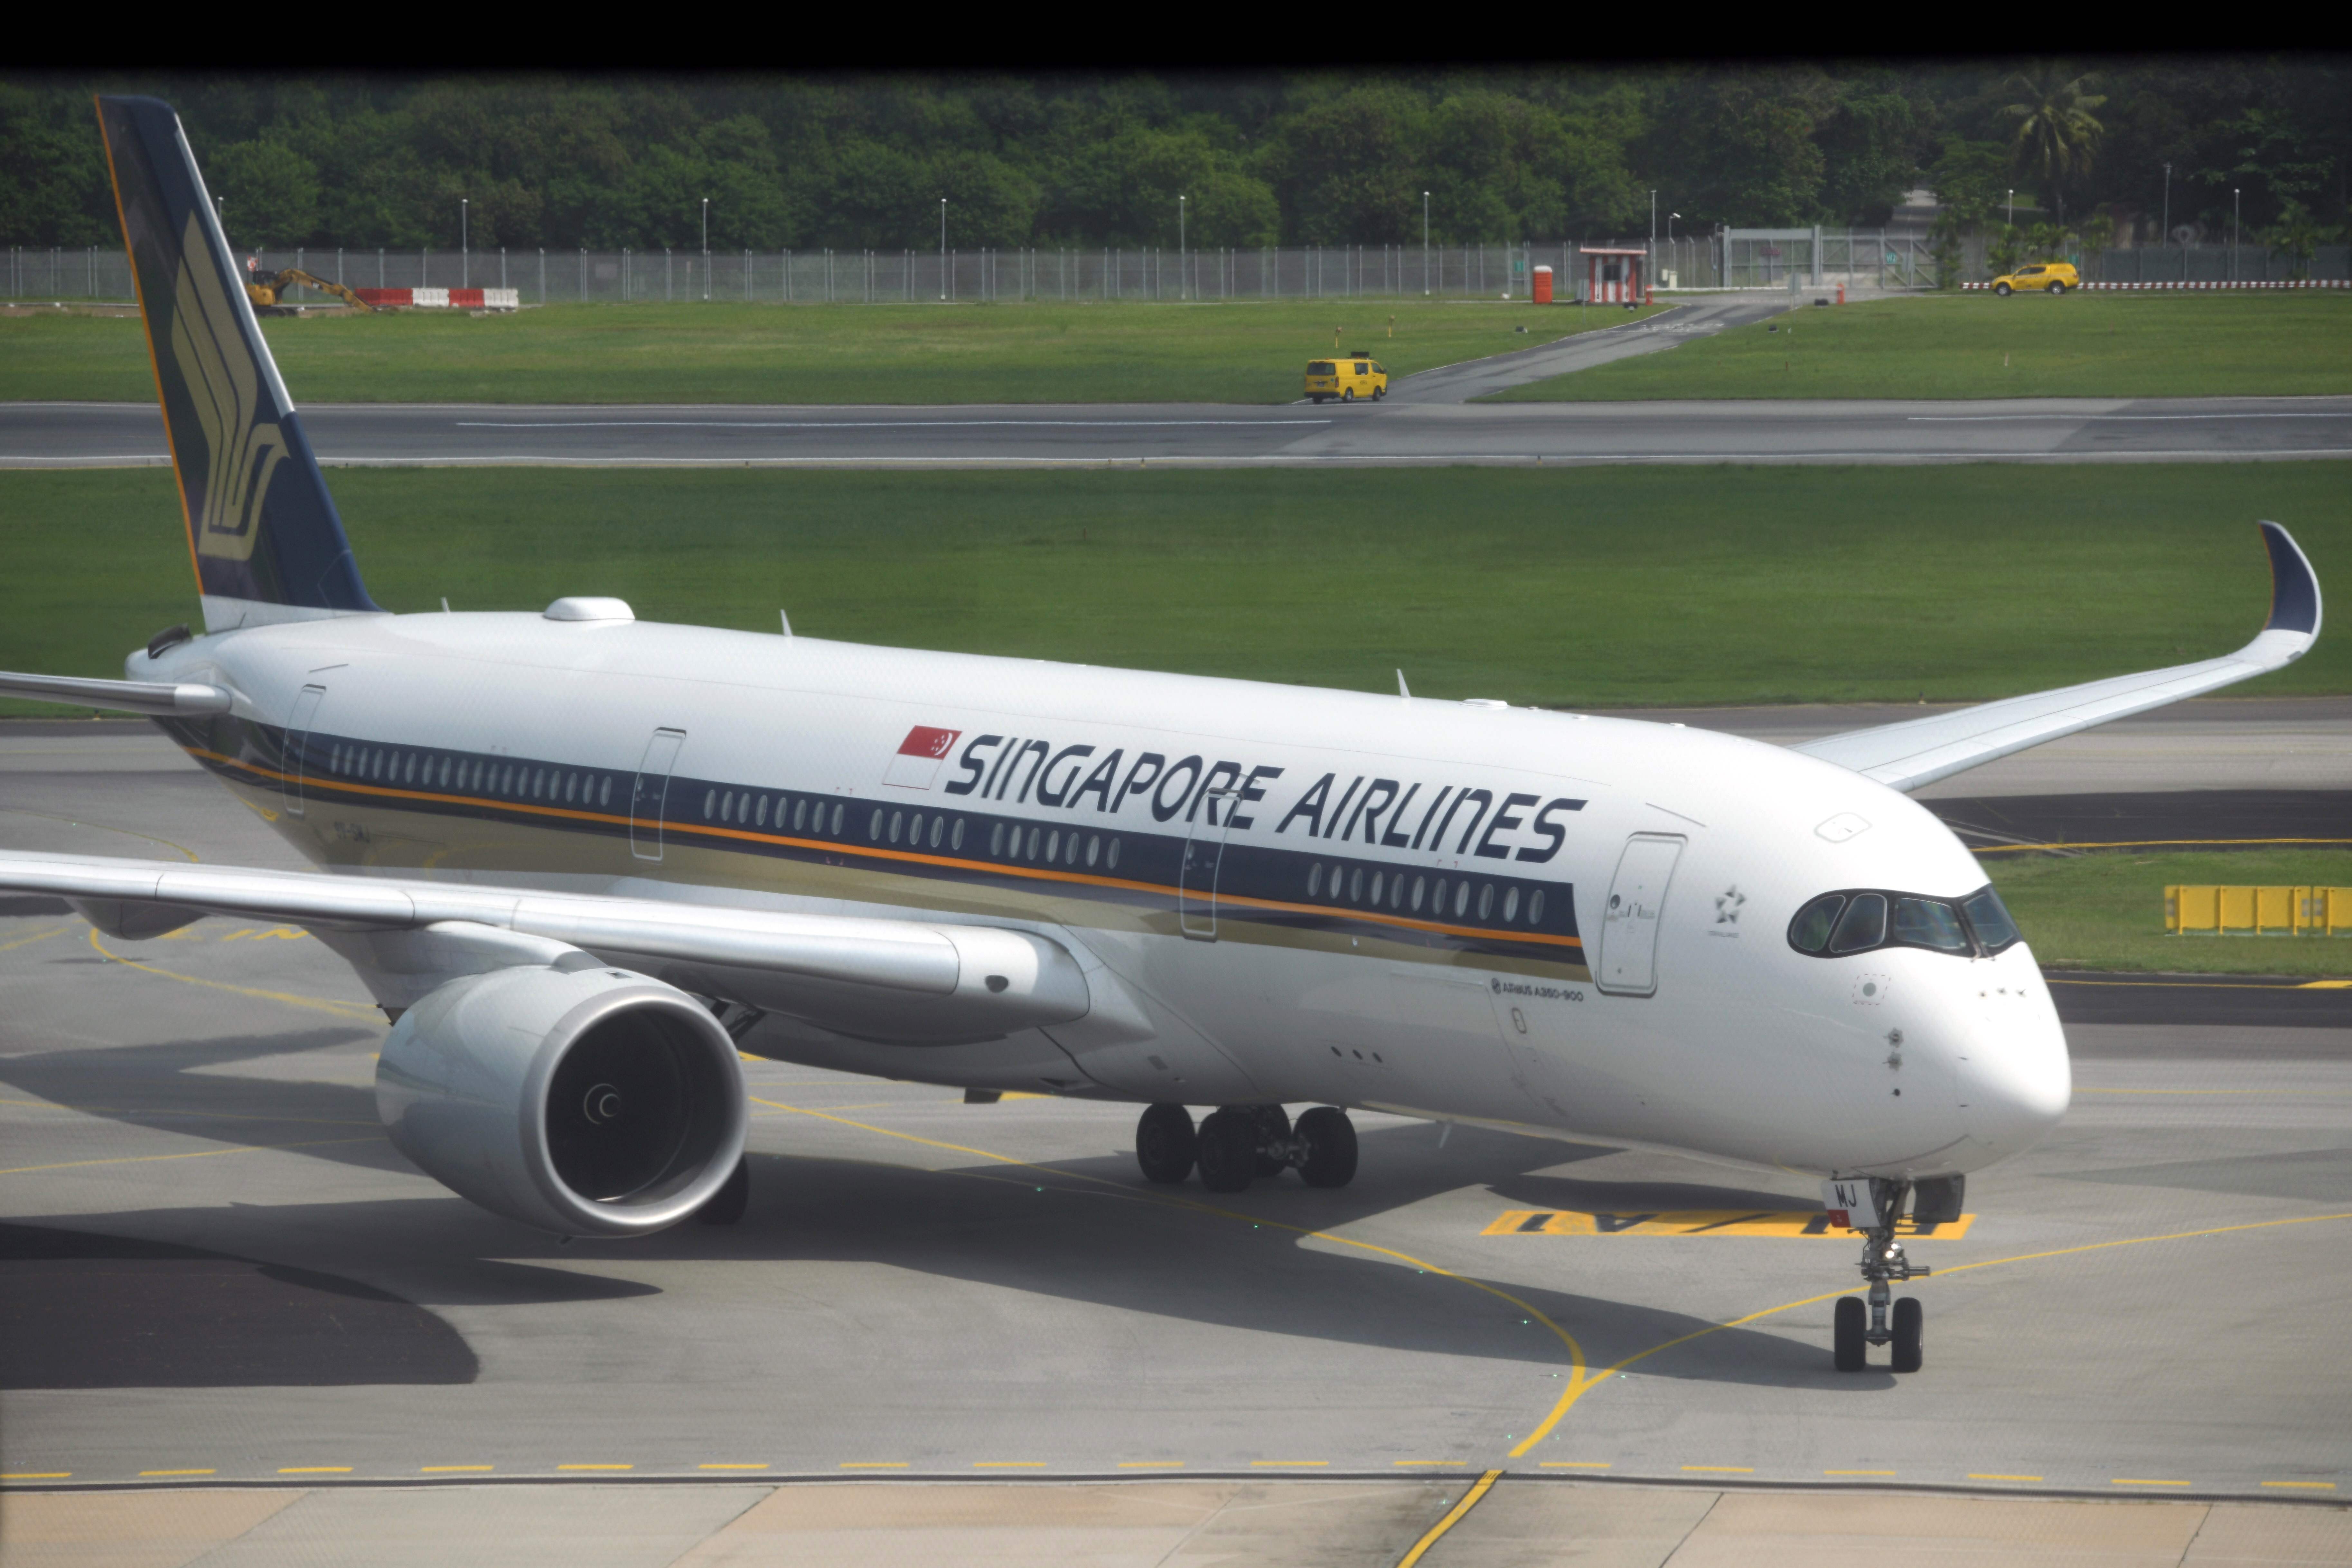 A Singapore Airlines passenger jet taxis along the tarmac as it arrives at Changi International Airport terminal in Singapore. Photo: AFP